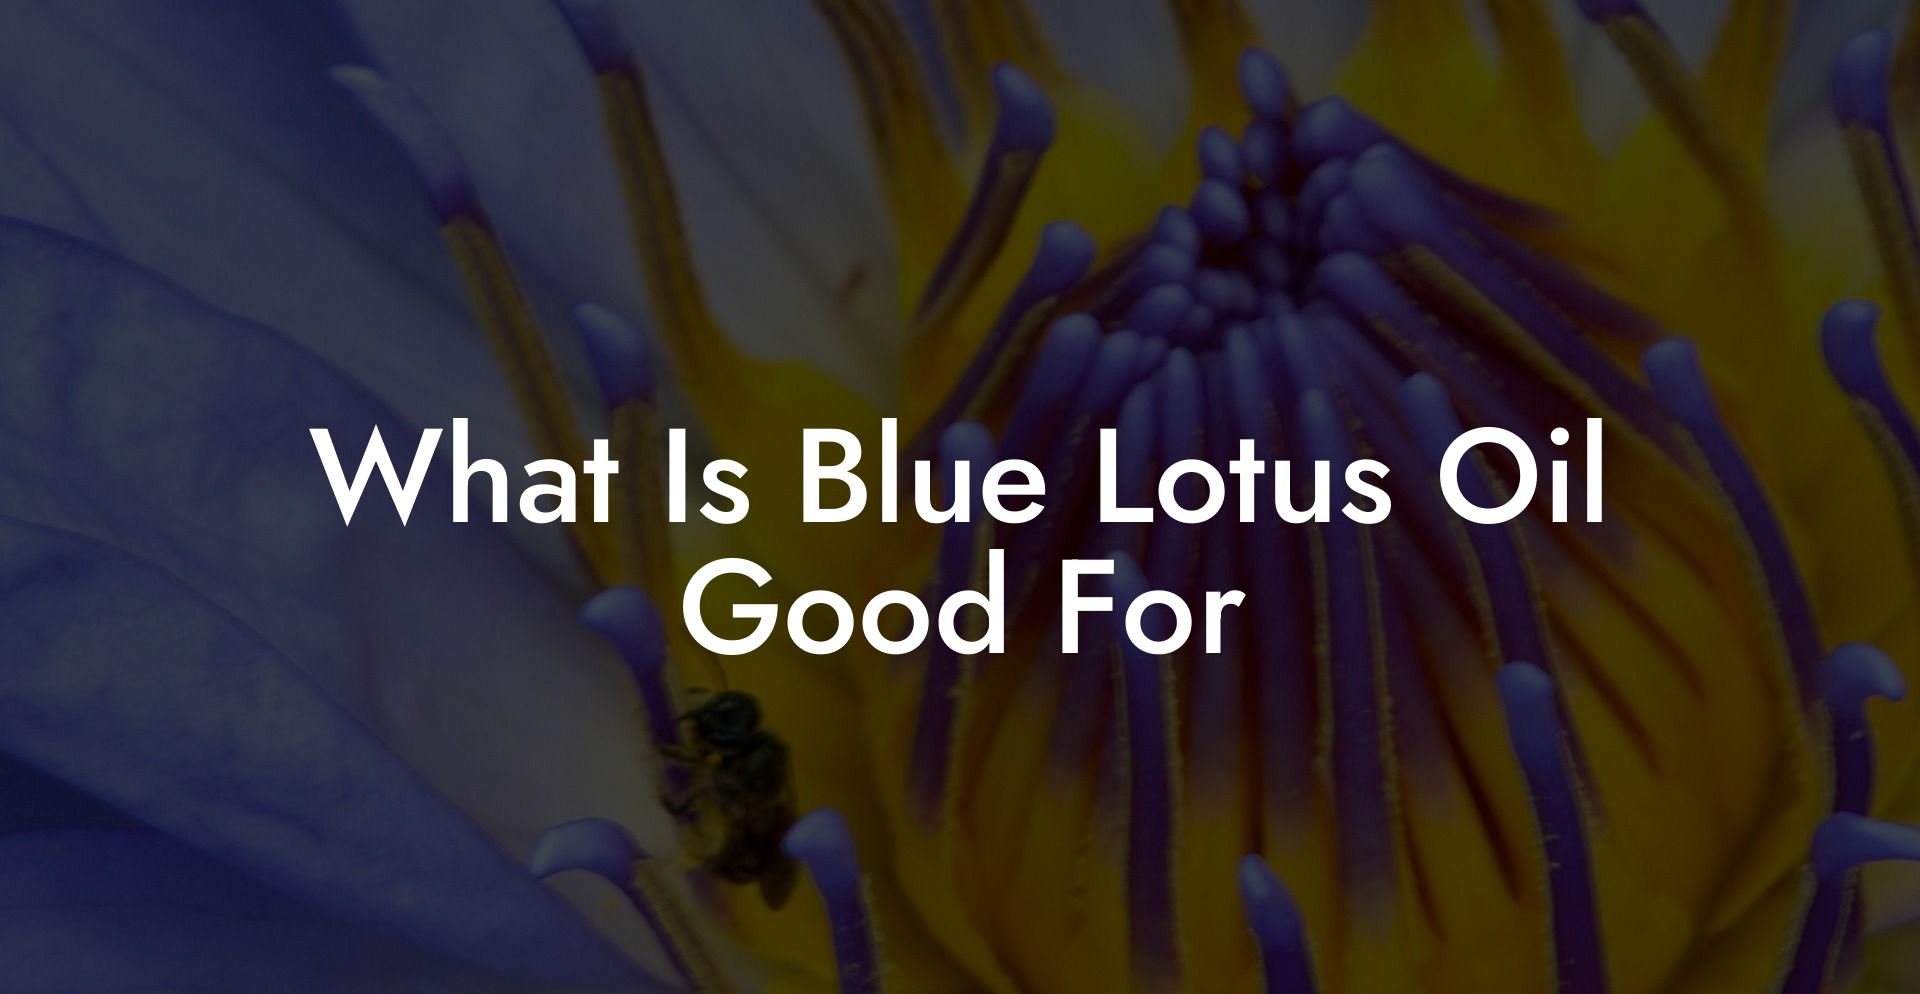 What Is Blue Lotus Oil Good For